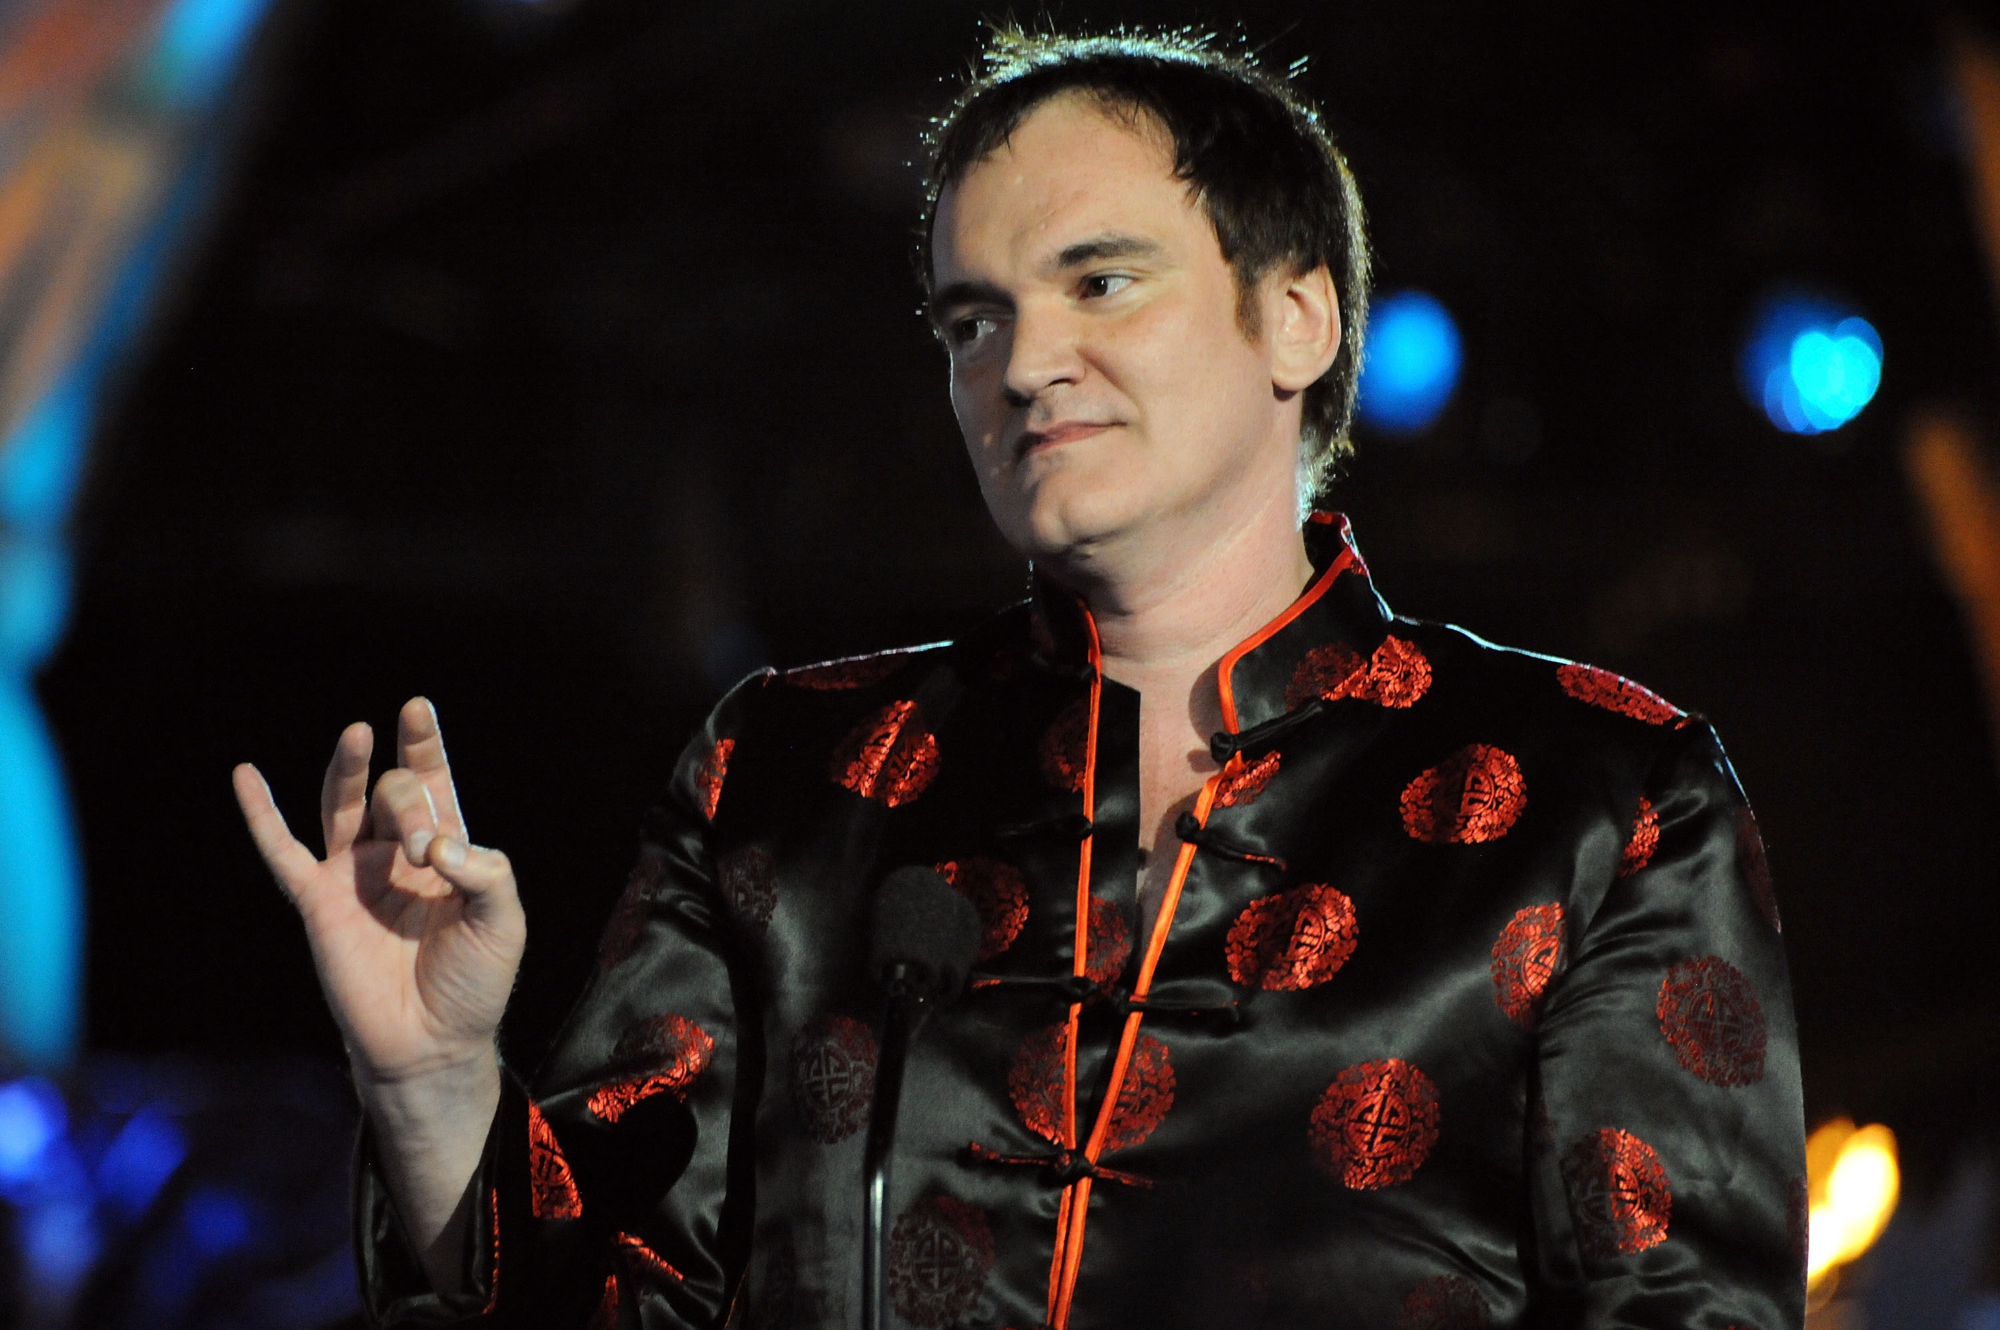 Quentin Tarantino Spike TV's 'Scream' horror event wearing a black and red robe